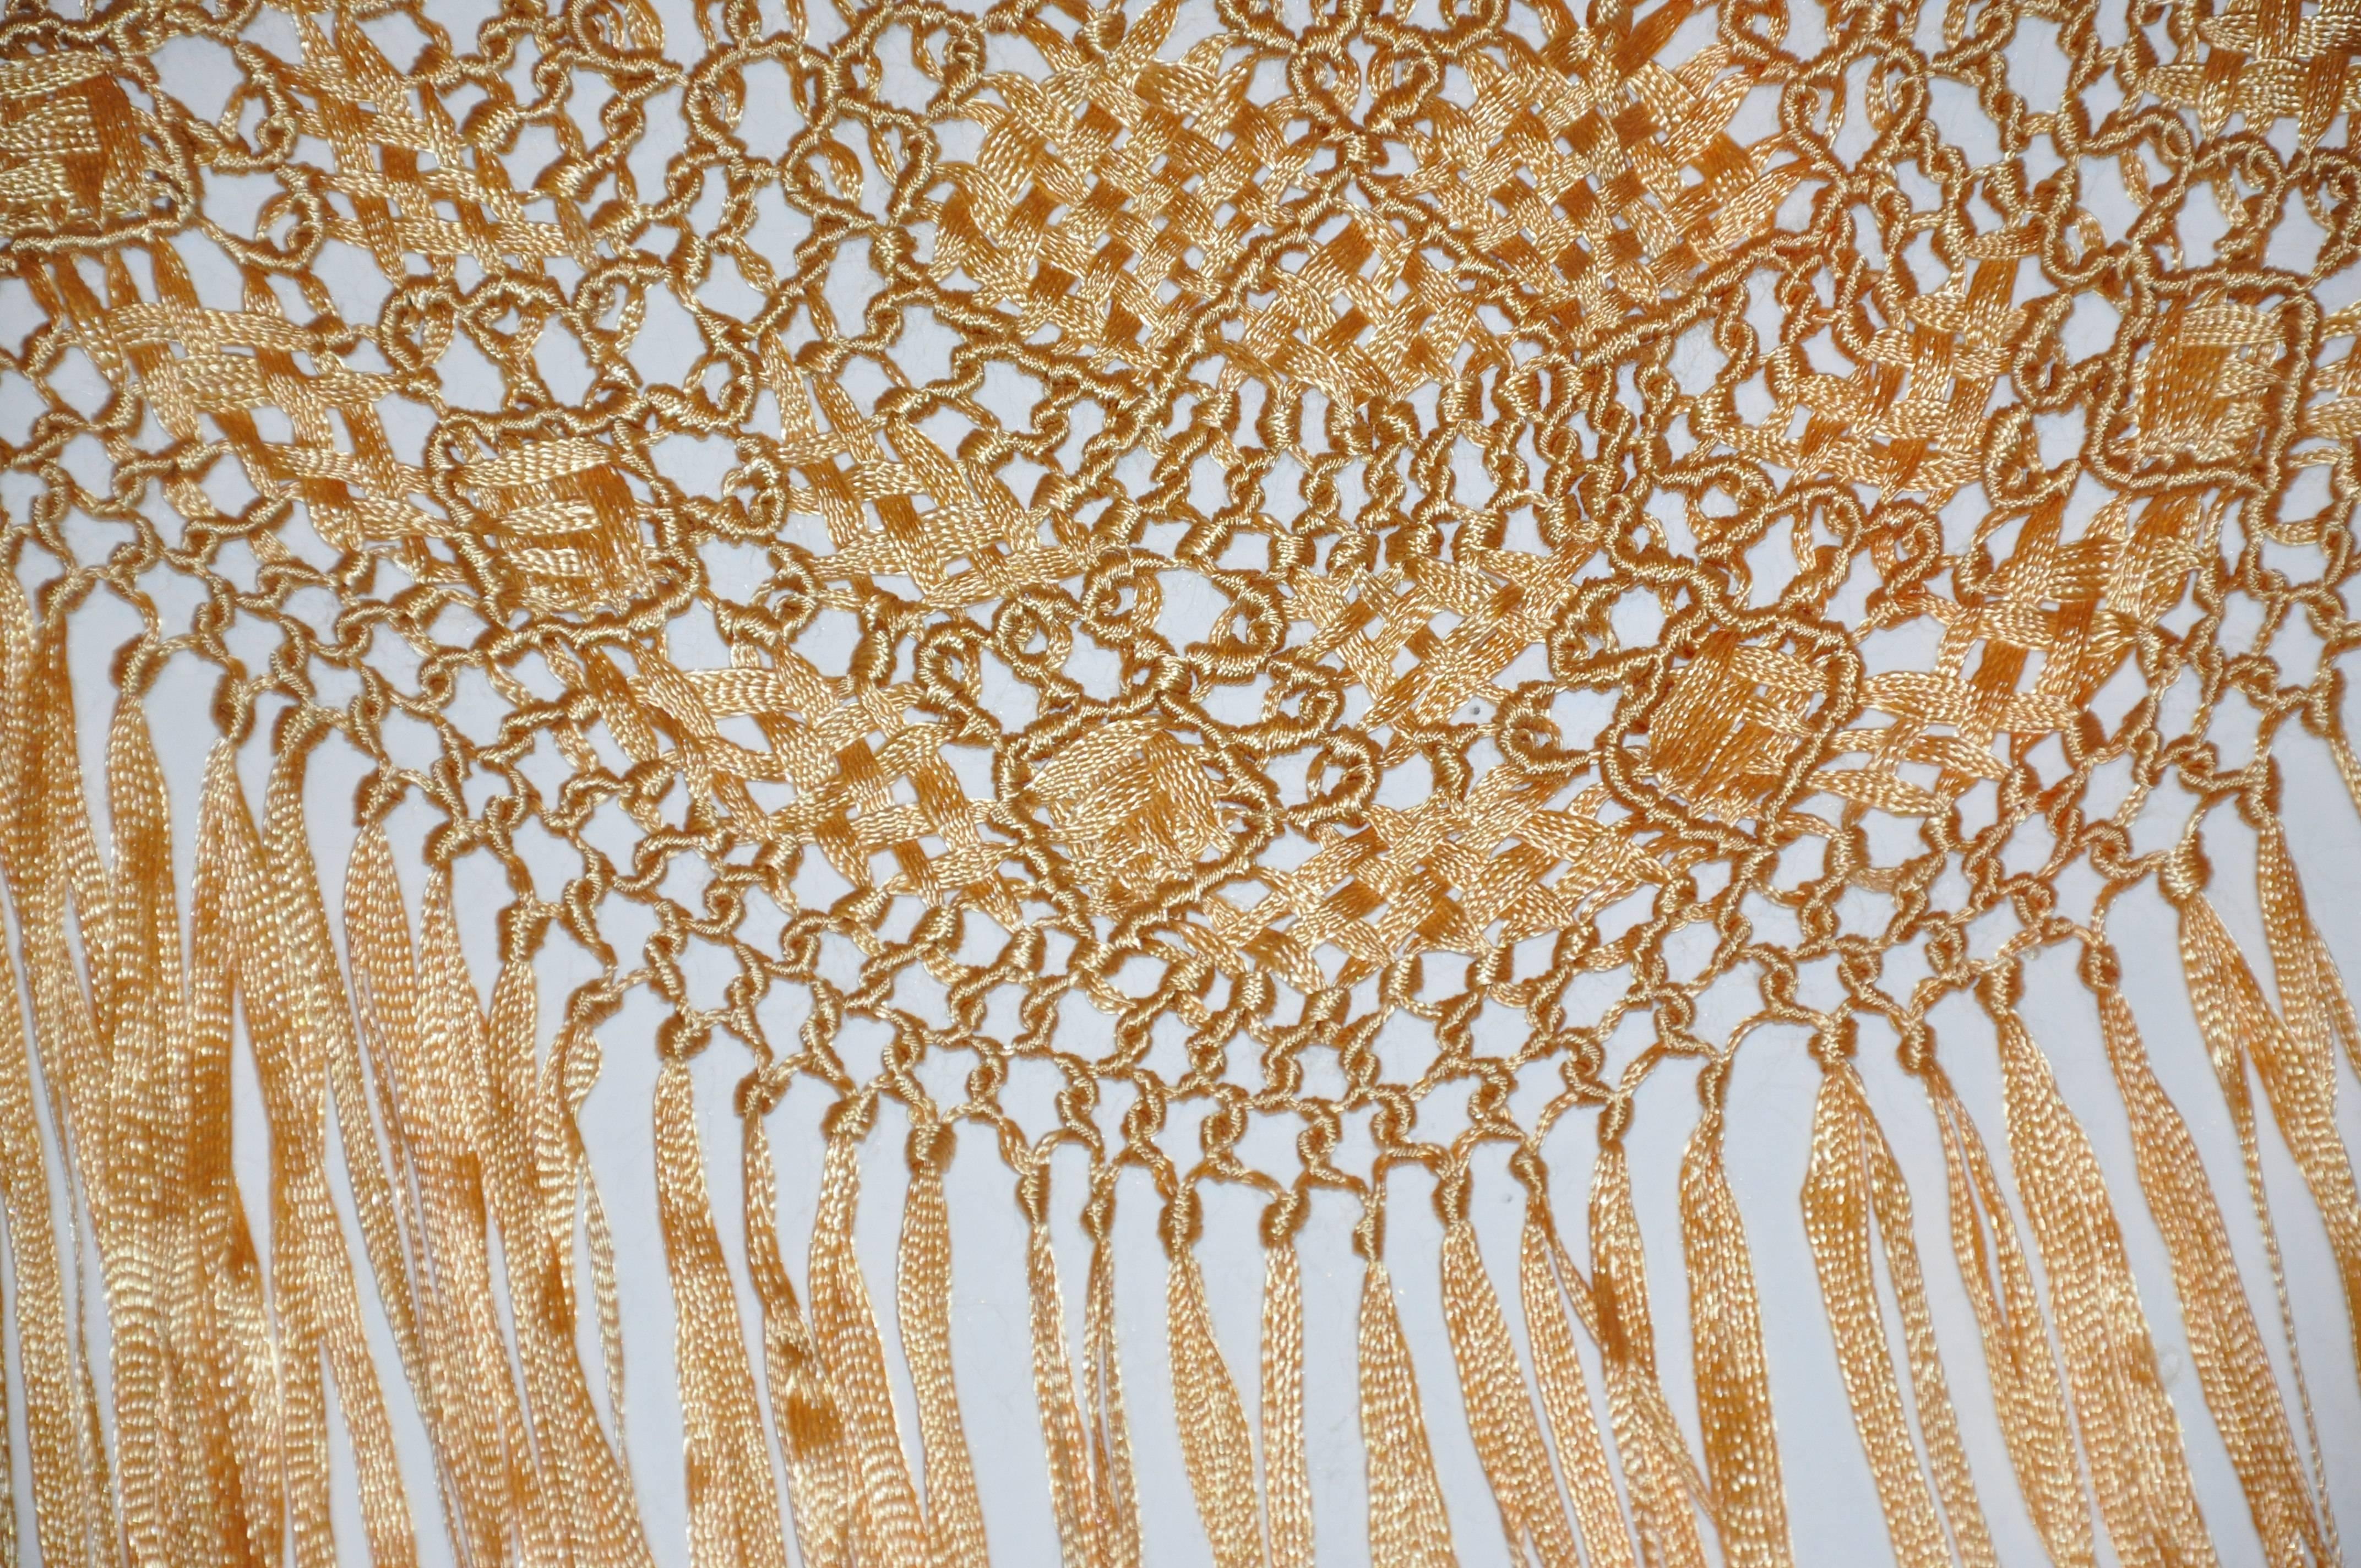        This wonderfully detailed large gilded golden gold fringe scarf with hand-knotted in the art of Macrame with the revival starting in the 1960s as well as the 1990s. The fringe accent measures 12 1/2 inches, with the scarf itself measuring 60